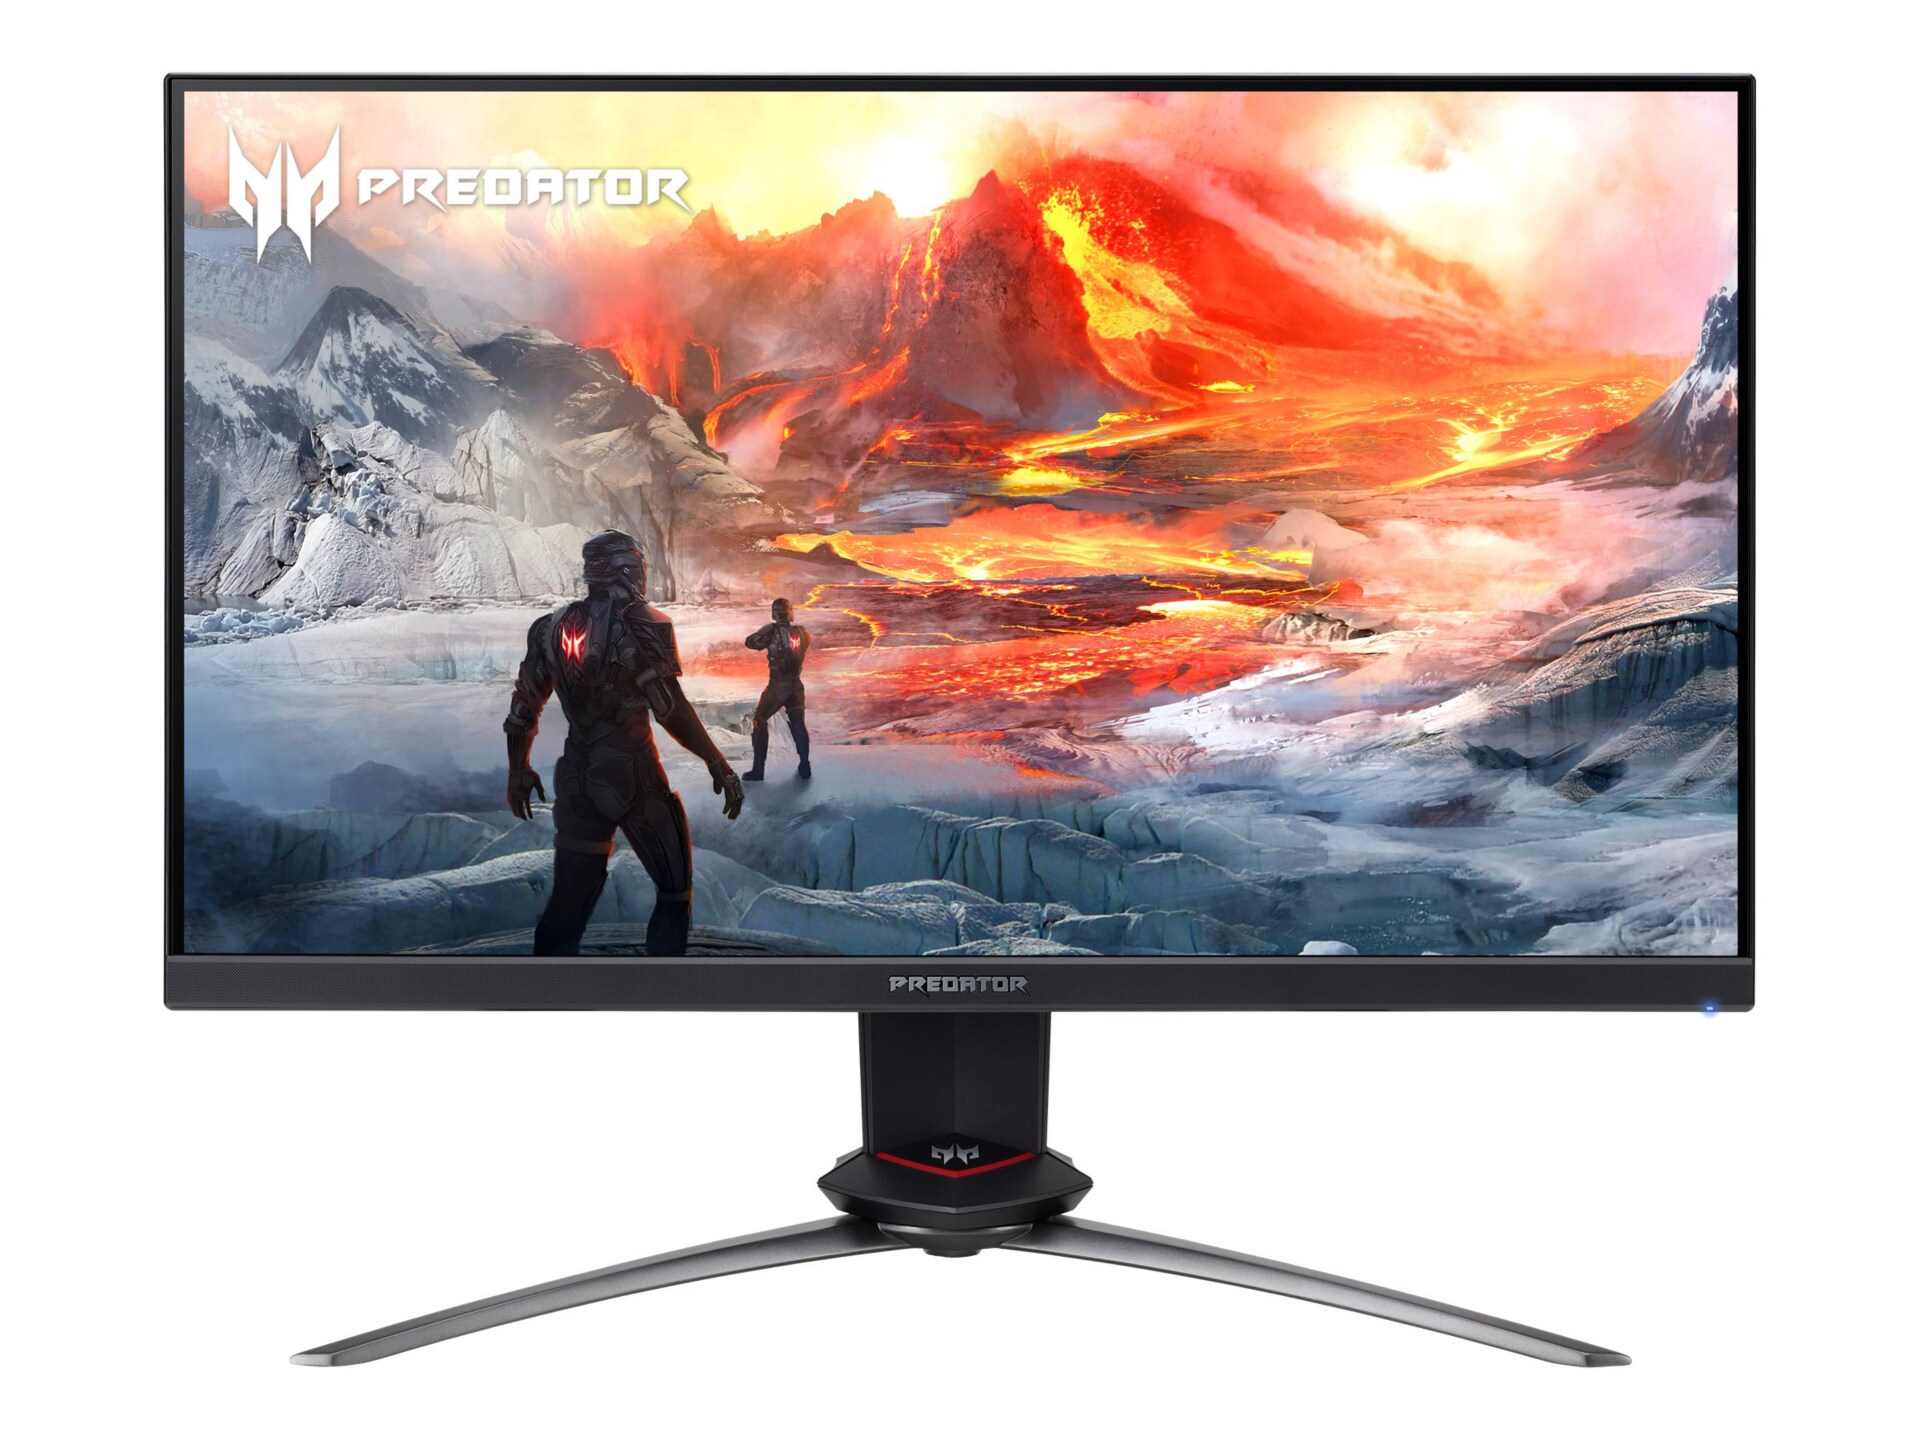 Acer Predator XB253Q GXbmiiprzx - LED monitor - Full HD (1080p) - 24.5" - HDR